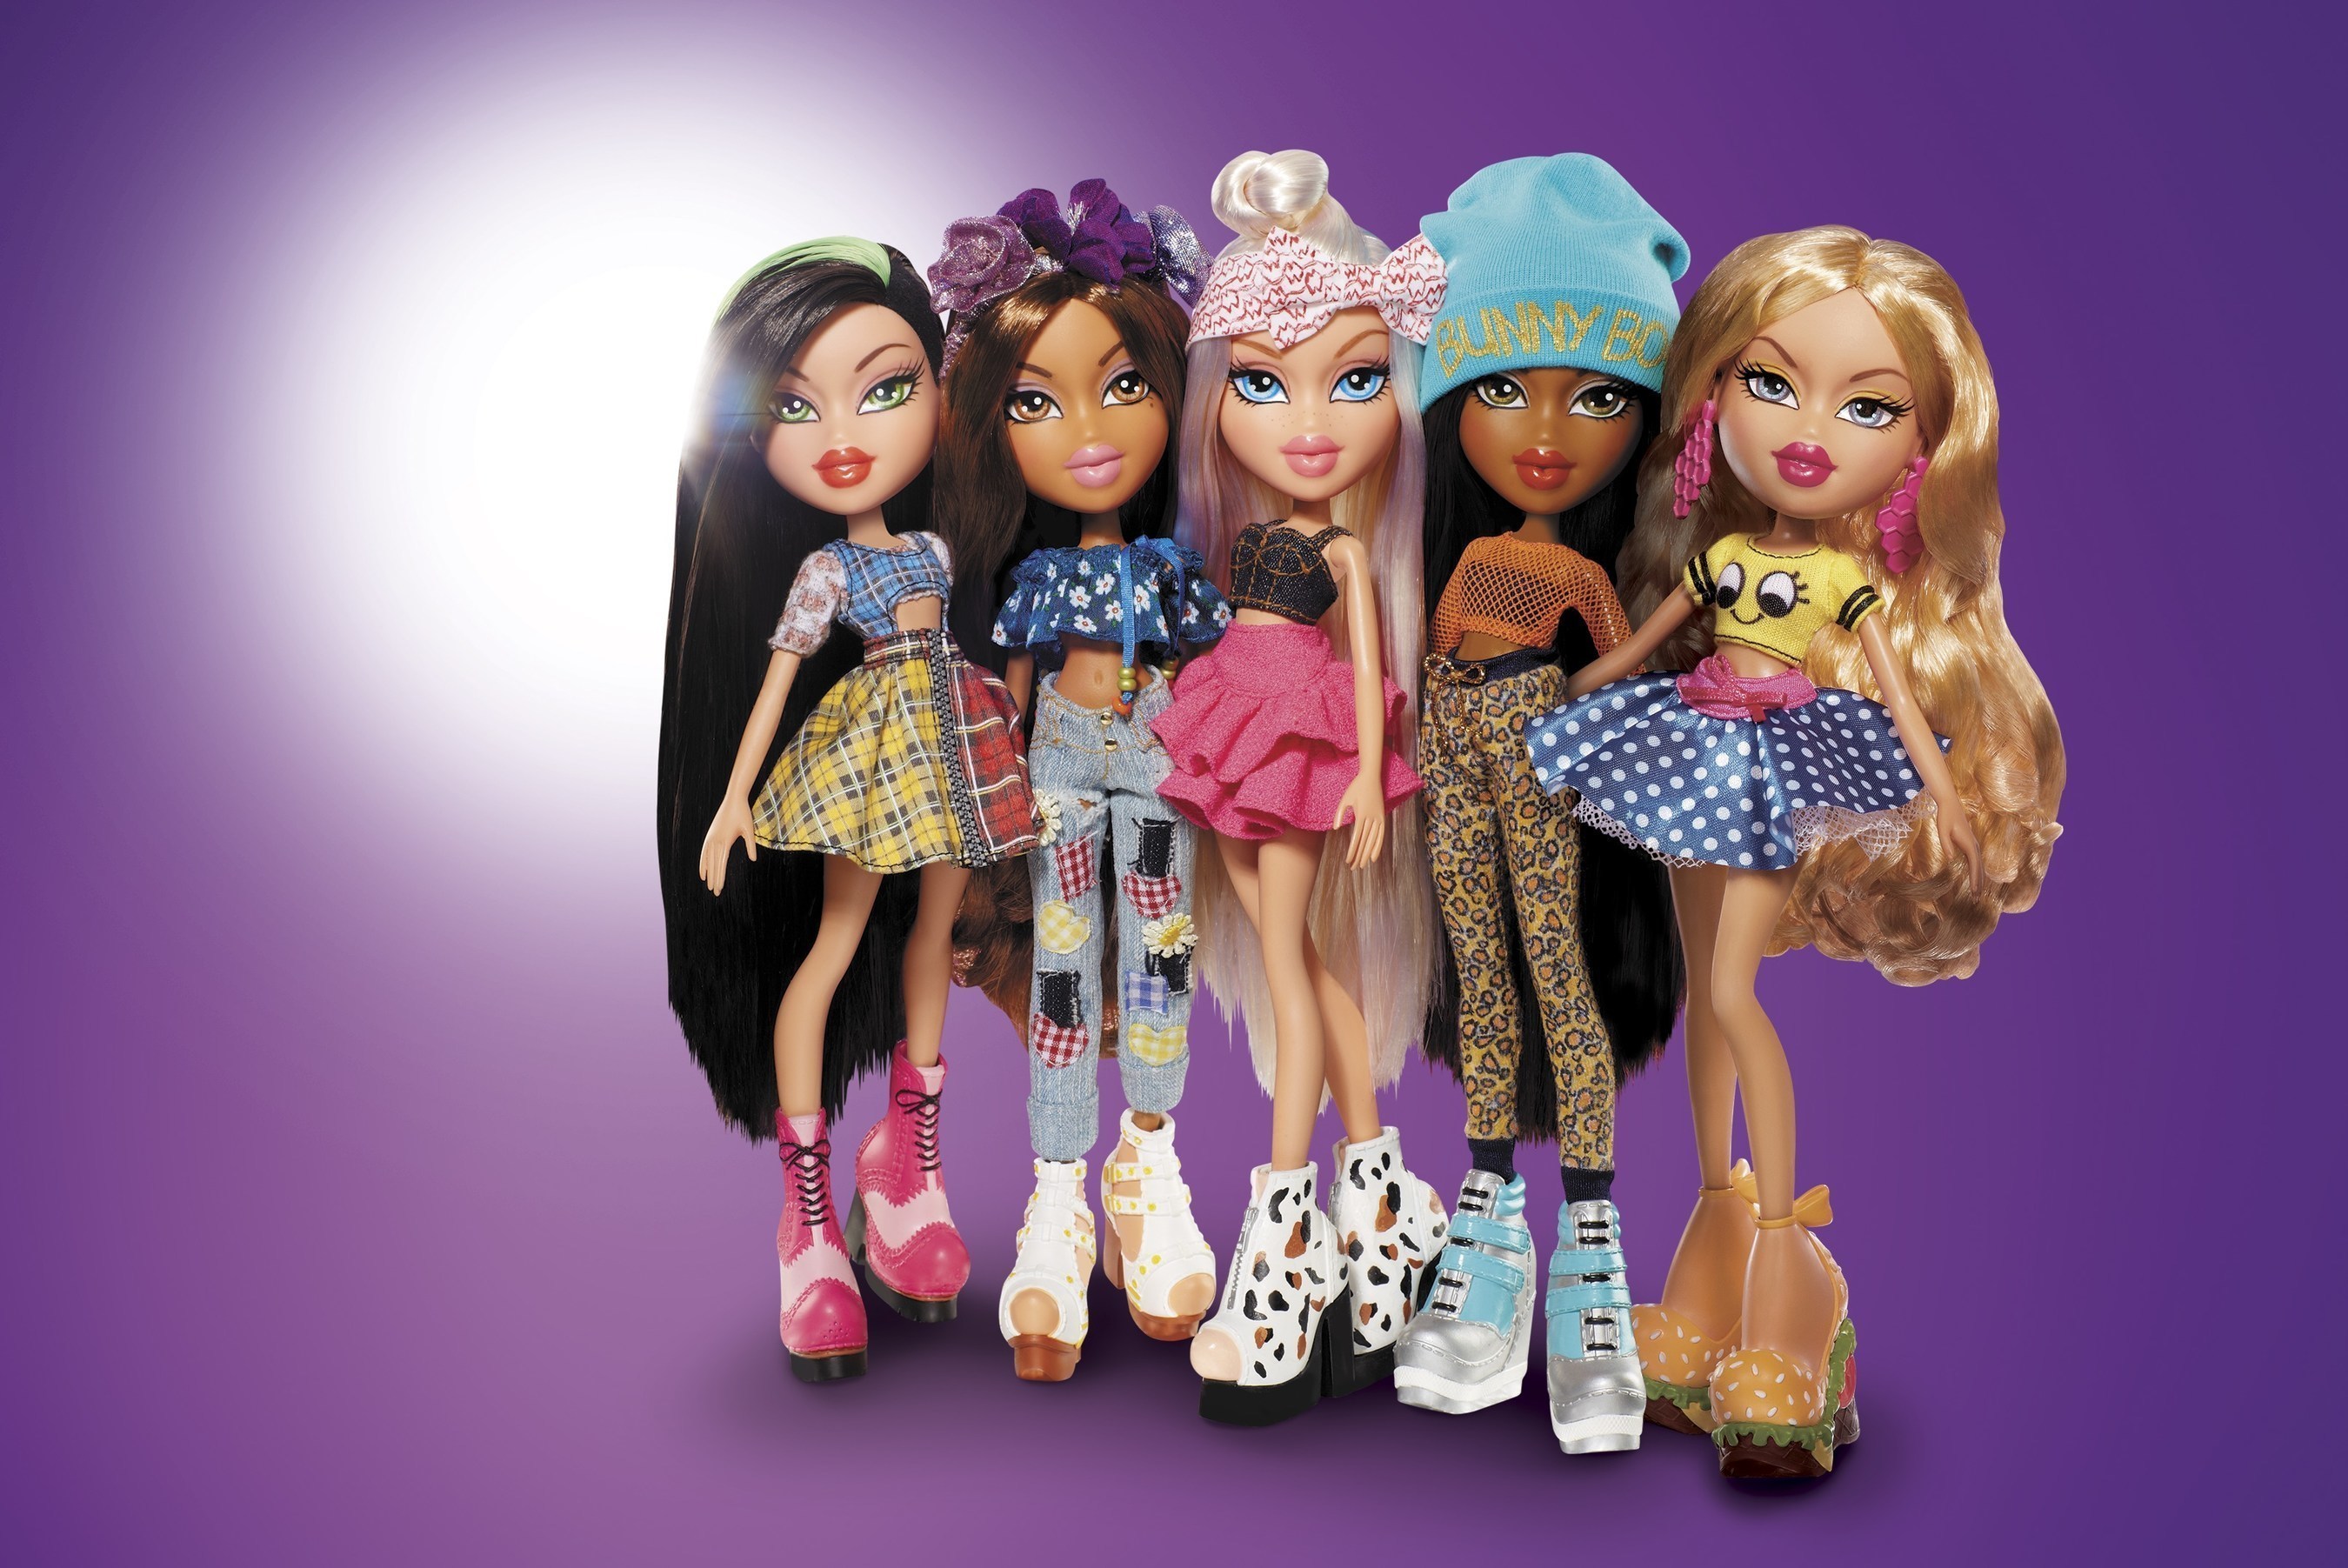 Bratz Returns With A New Look And Digital Content That Embody The Modern Day Girl